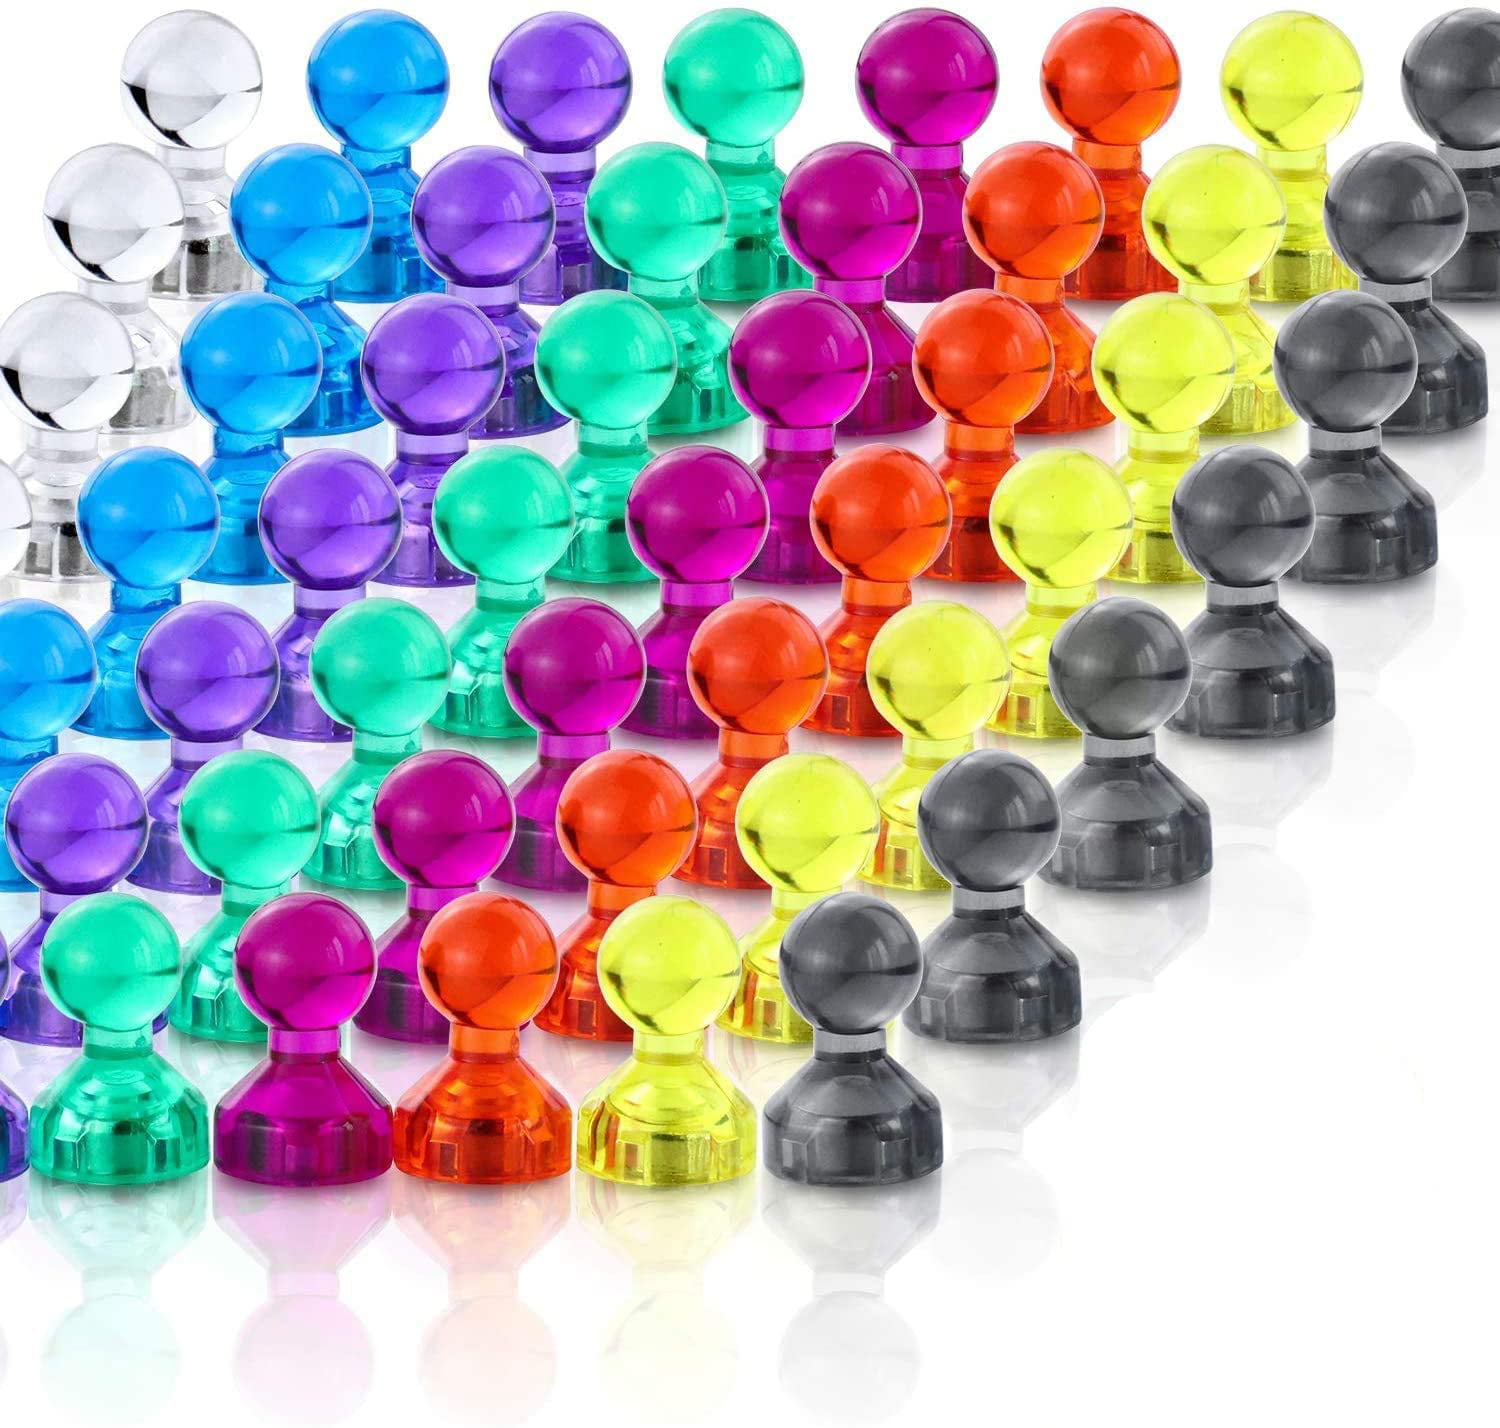 50 Magnetic Push Pins For Office Whiteboard Home Refrigerator Maps Notes Clear 